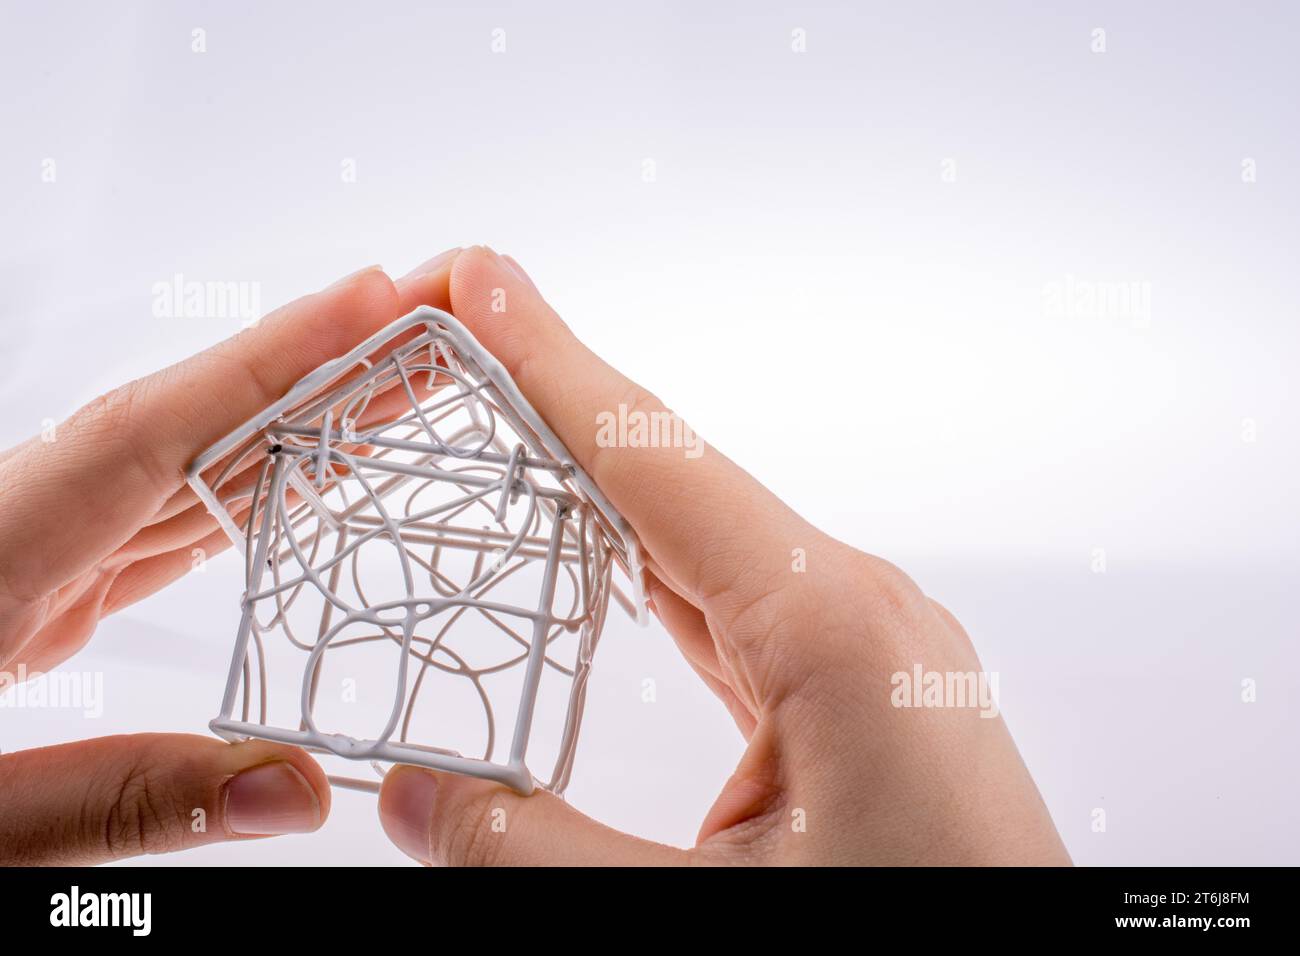 Little model house made of white metal wire in hand Stock Photo